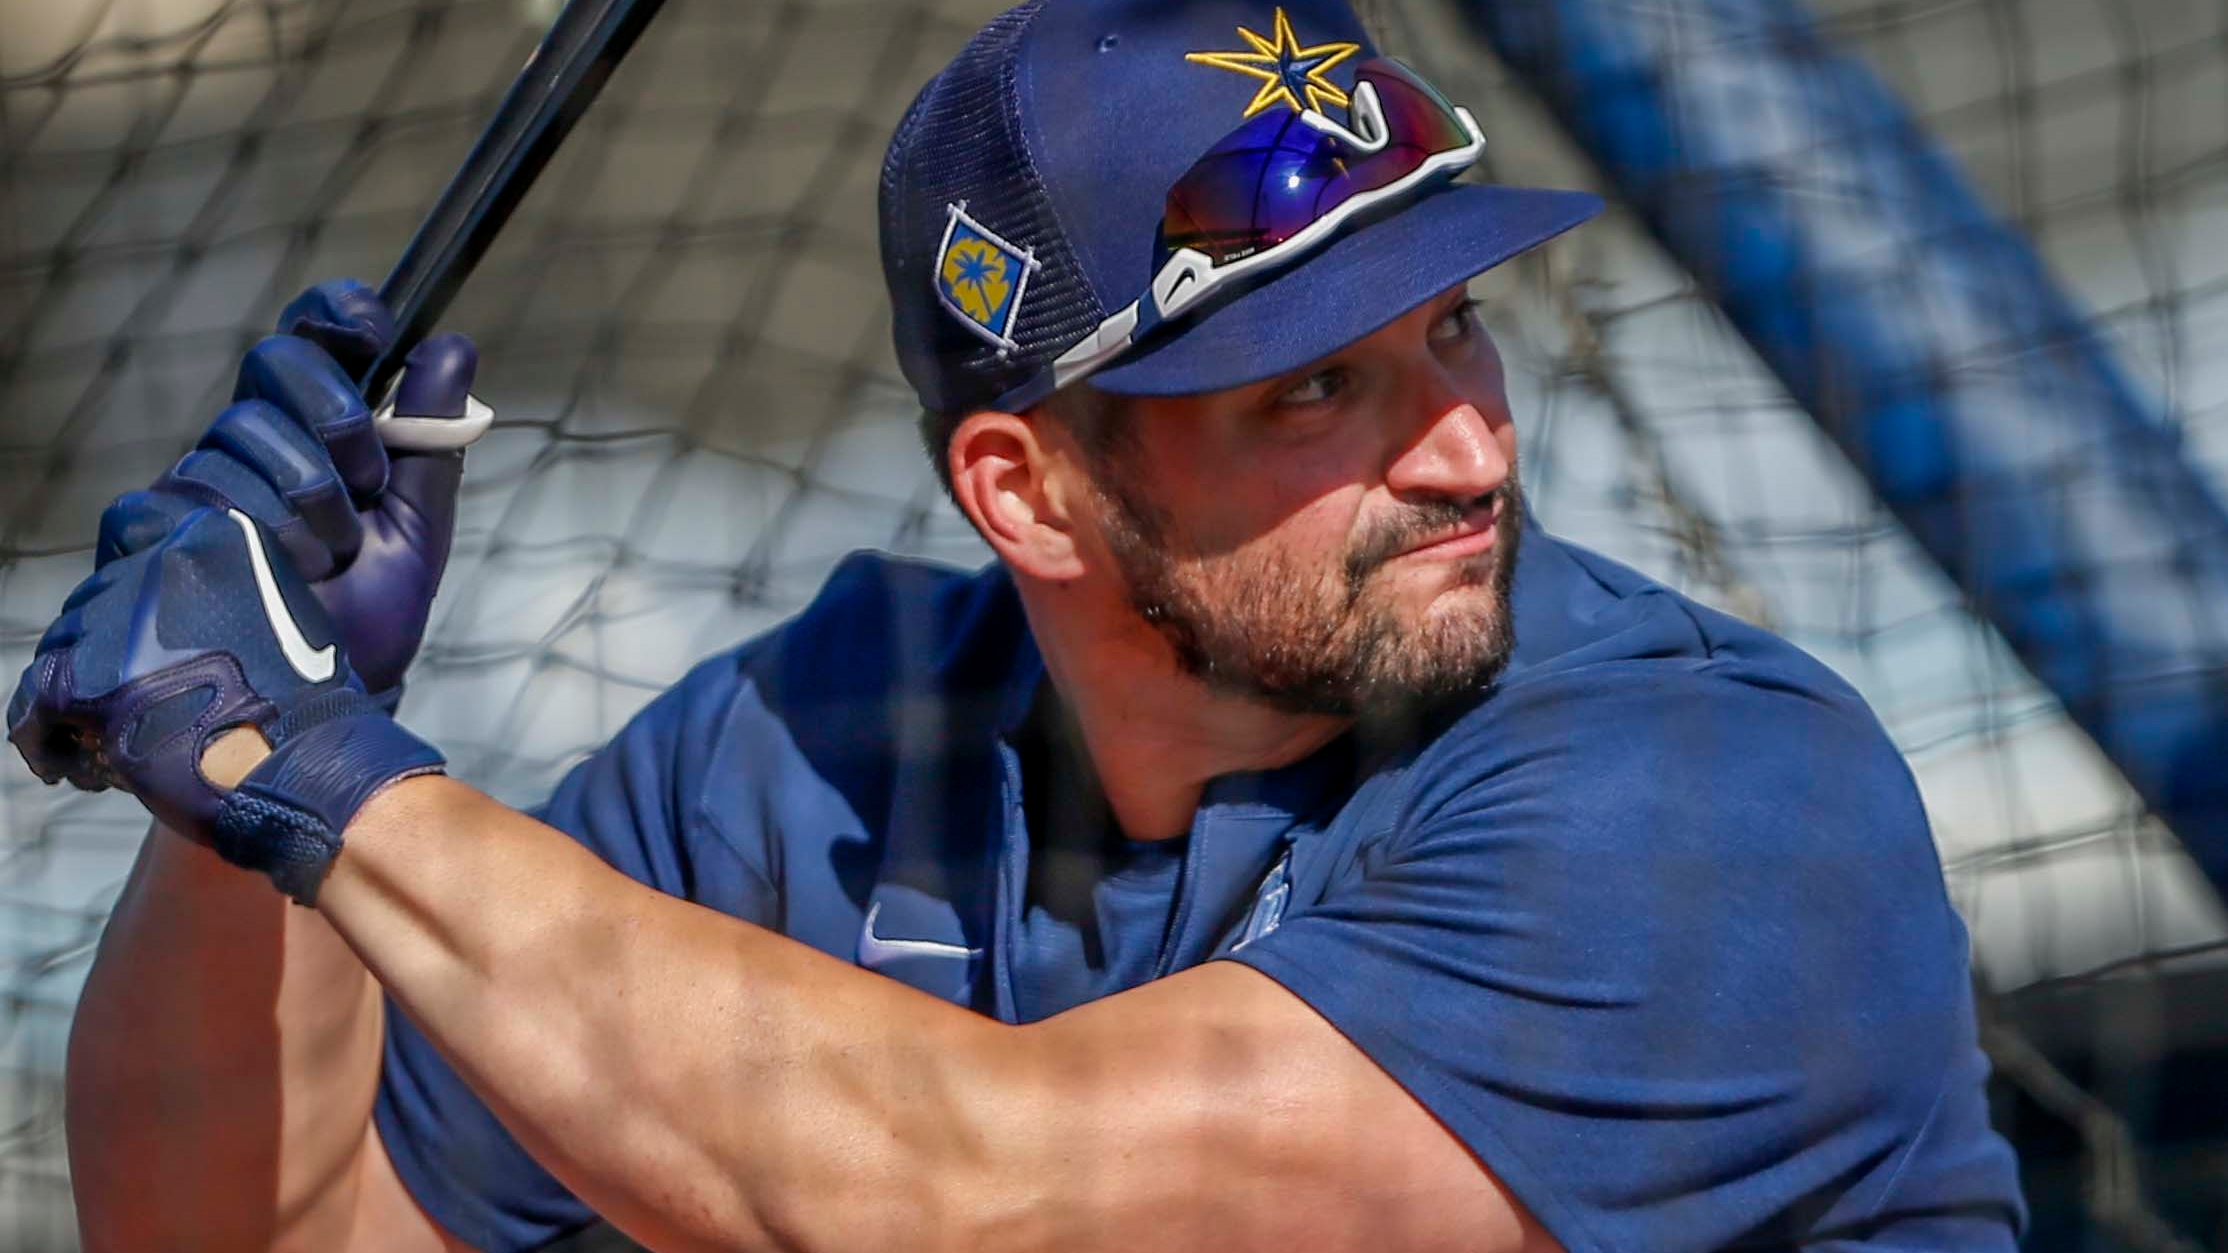 Tamp Bay Rays catcher and Cape Coral native Mike Zunino homers in